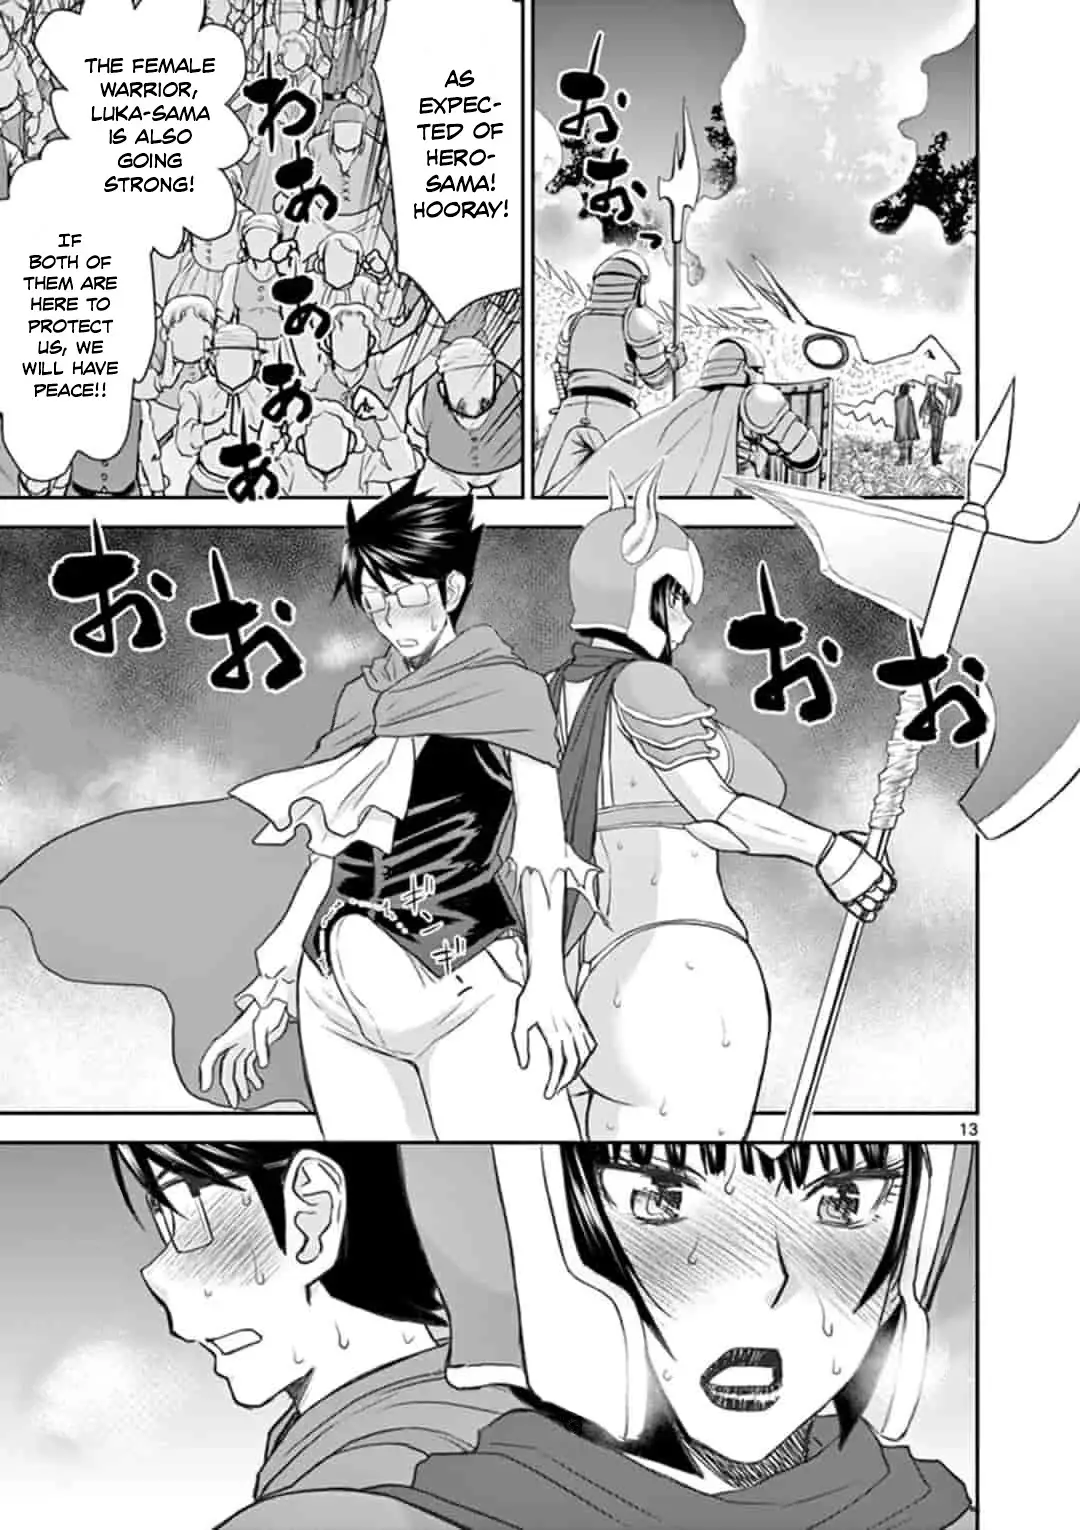 Isekai Affair ~Ten Years After The Demon King's Subjugation, The Married Former Hero And The Female Warrior Who Lost Her Husband ~ - 3 page 14